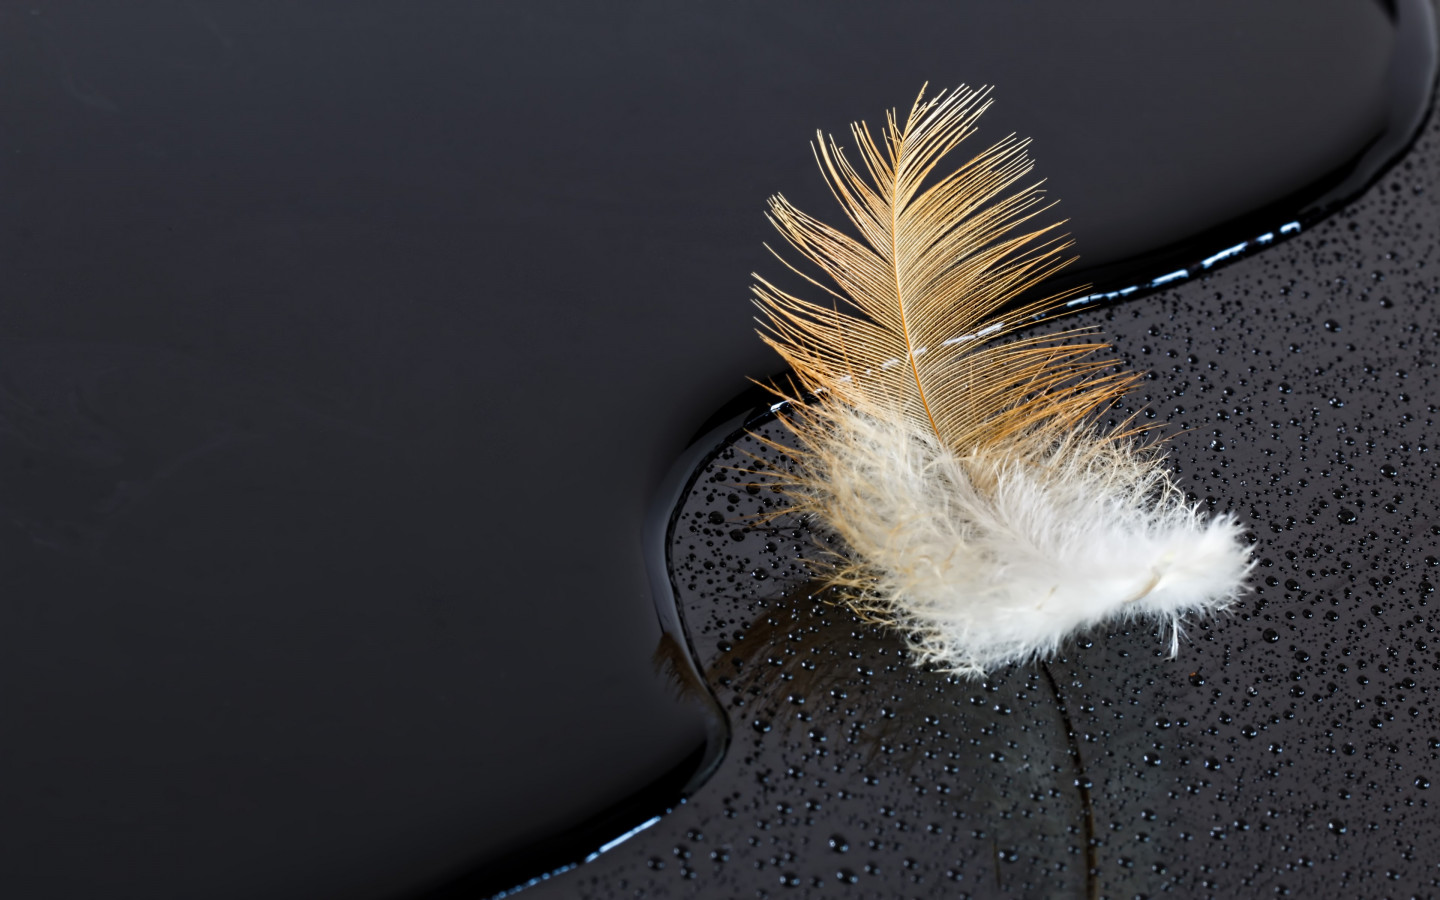 Dark surface with a feather on water wallpaper 1440x900